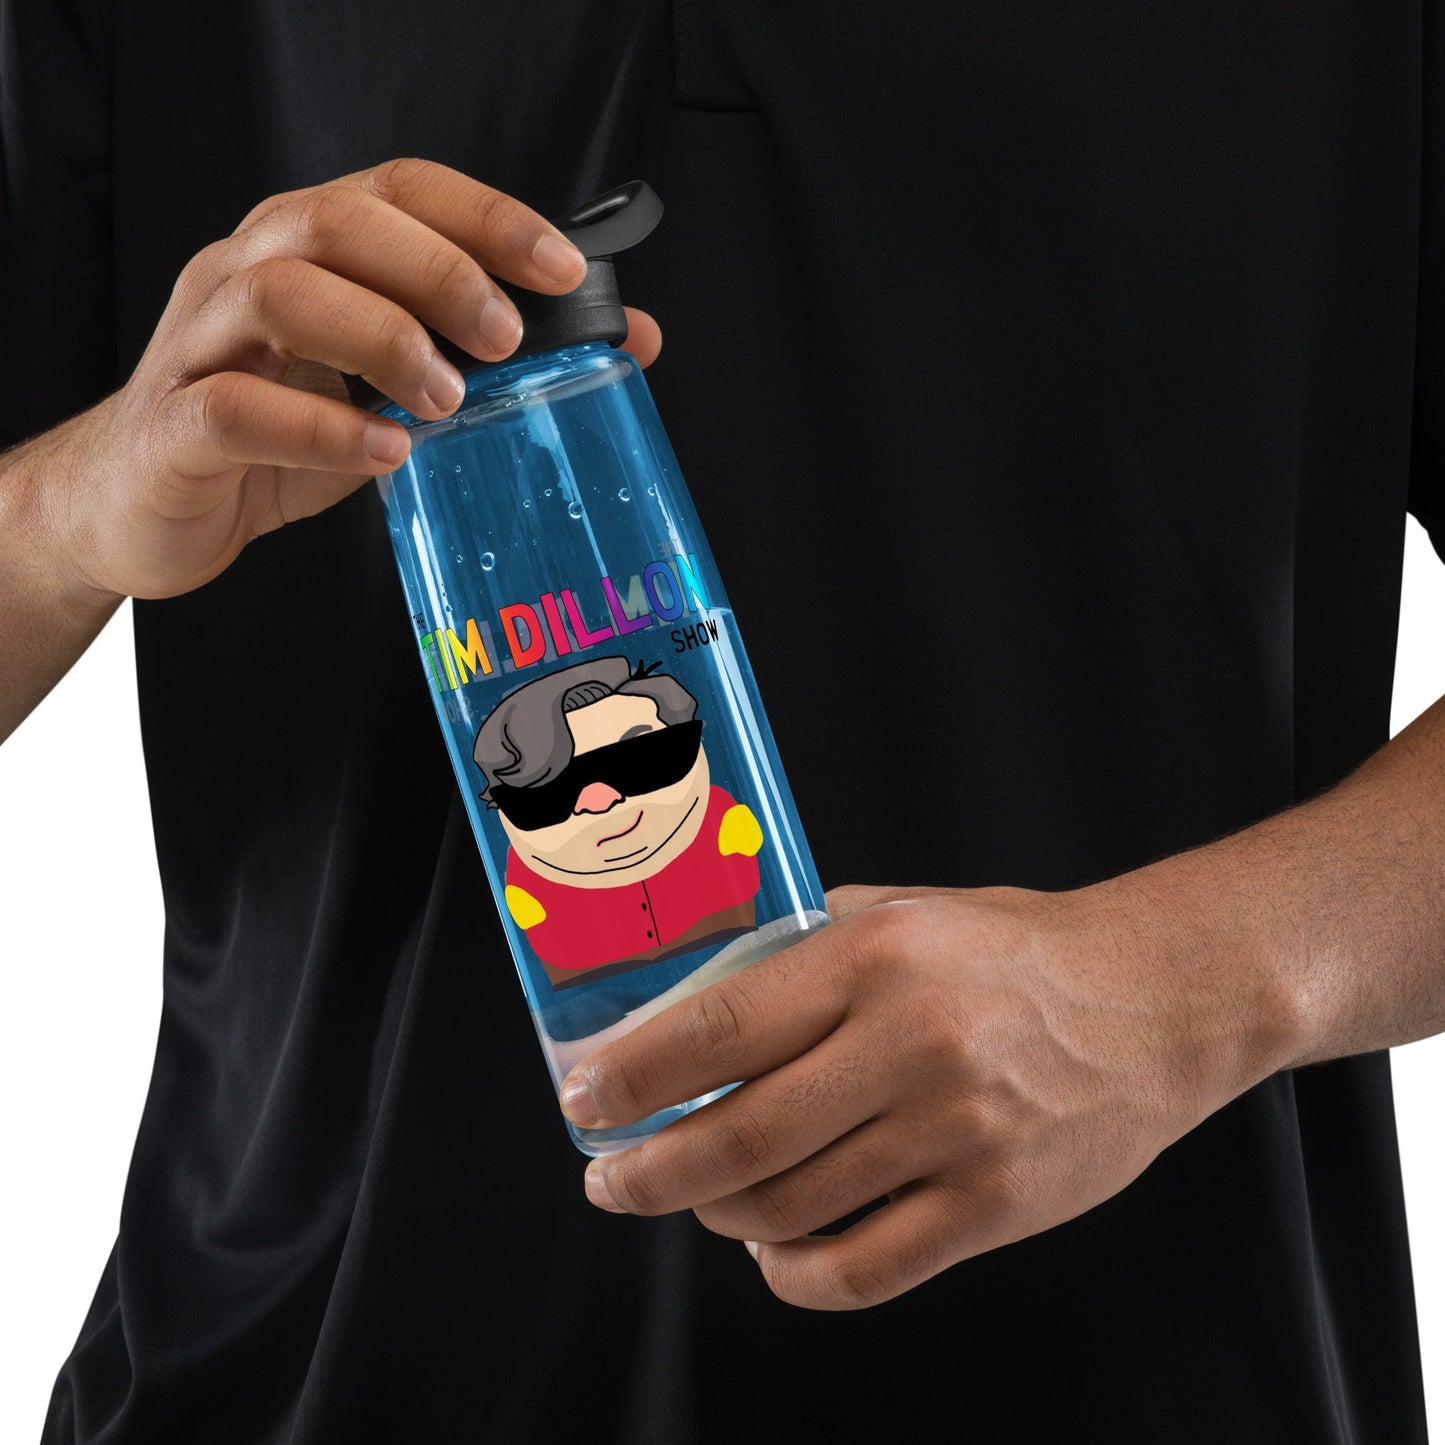 Tim Dillon Cartman, Southpark, The Tim Dillon Show, Tim Dillon Podcast, Tim Dillon Merch, Tim Dillon Sports water bottle Next Cult Brand Podcasts, Stand-up Comedy, Tim Dillon